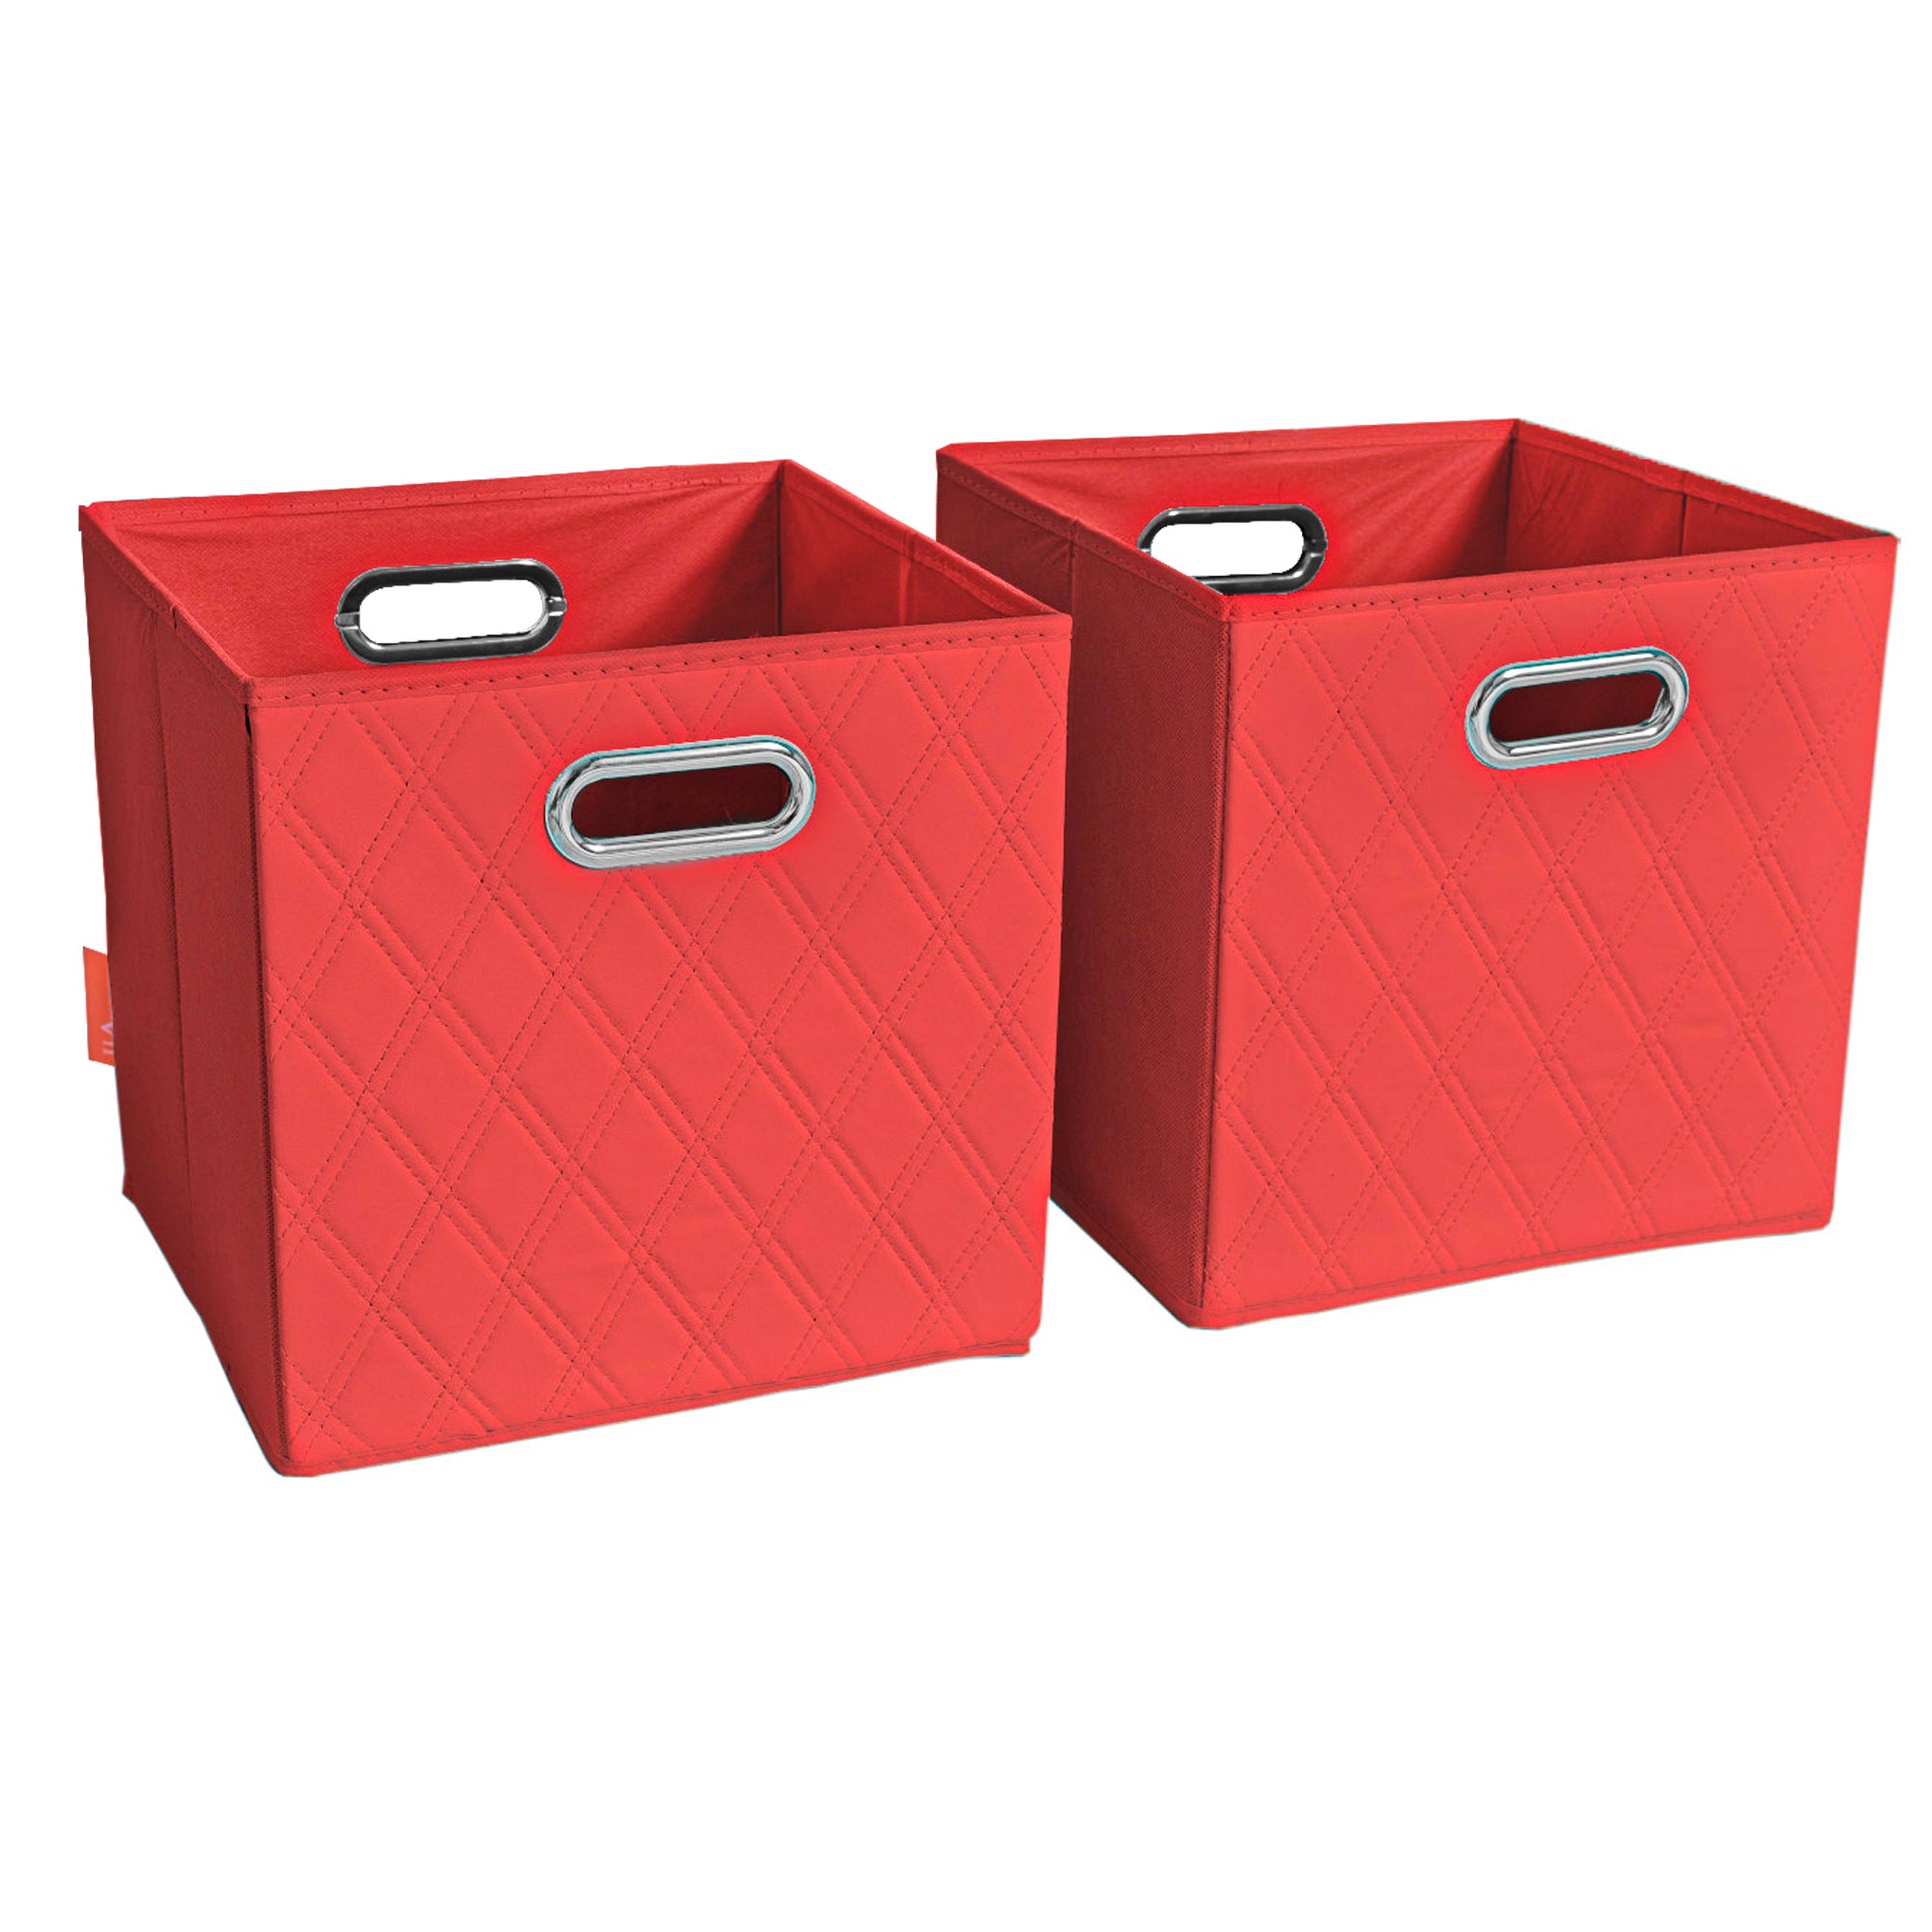 JIAessentials 12 inch Foldable Diamond Patterned Faux Leather Storage Cube Bins Set of Two with Dual Handles - 12" Red